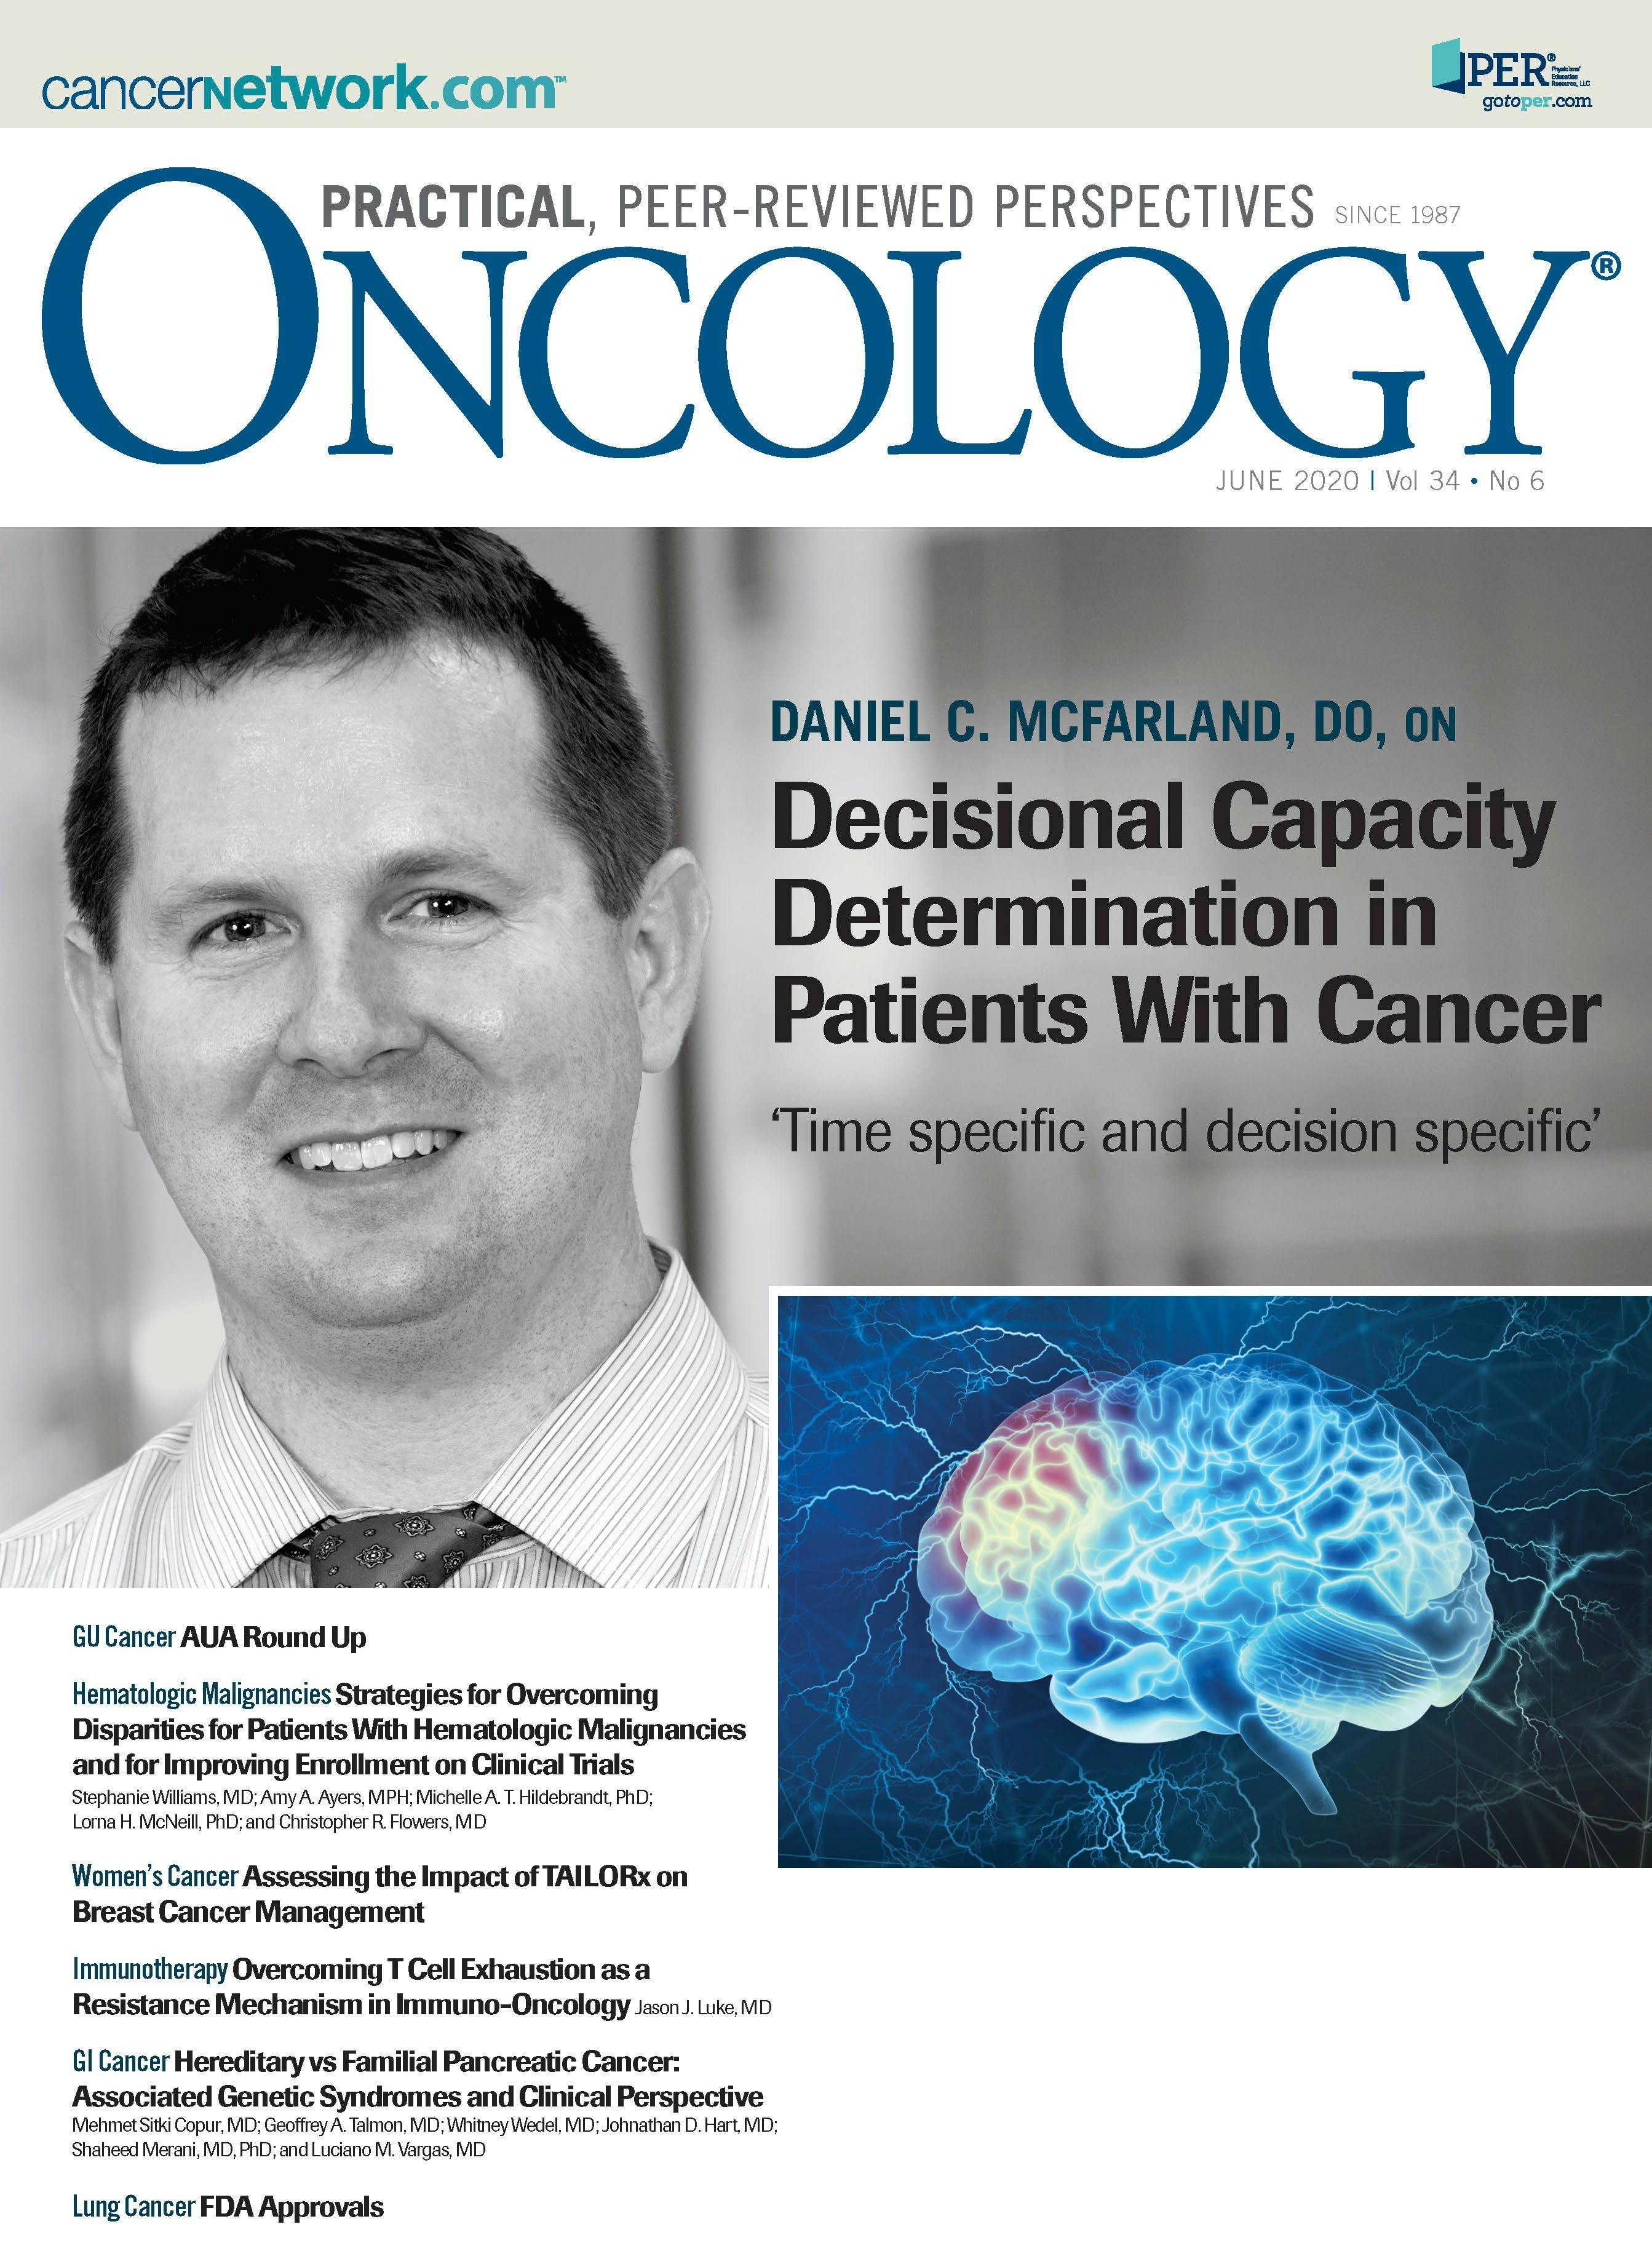 ONCOLOGY Vol 34 Issue 6